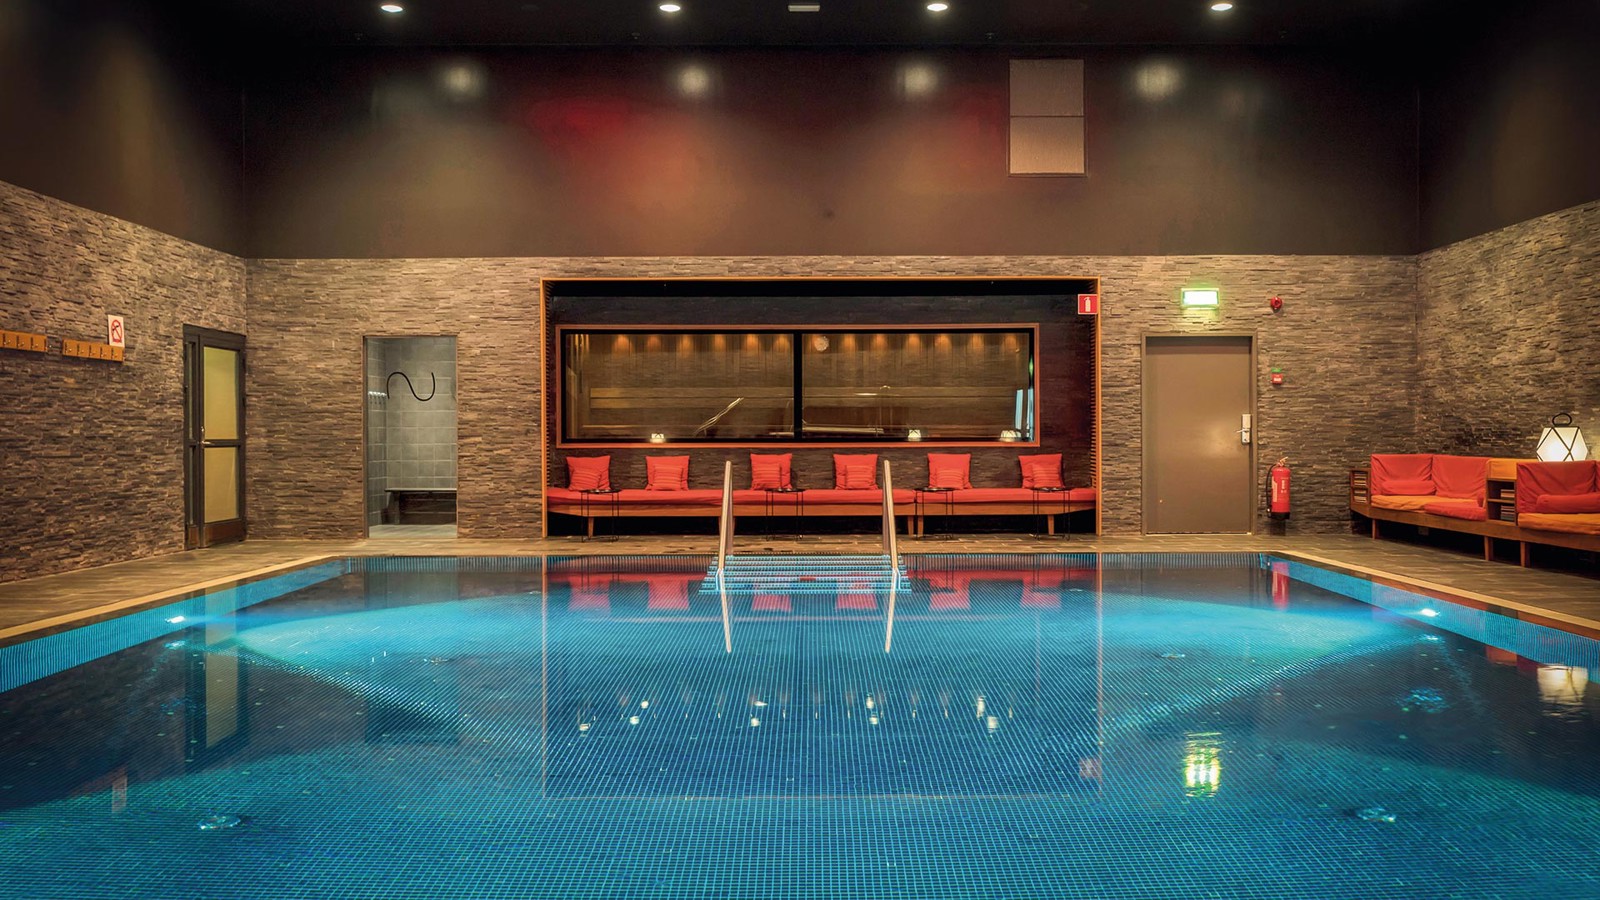 A large indoor pool in subdued lighting